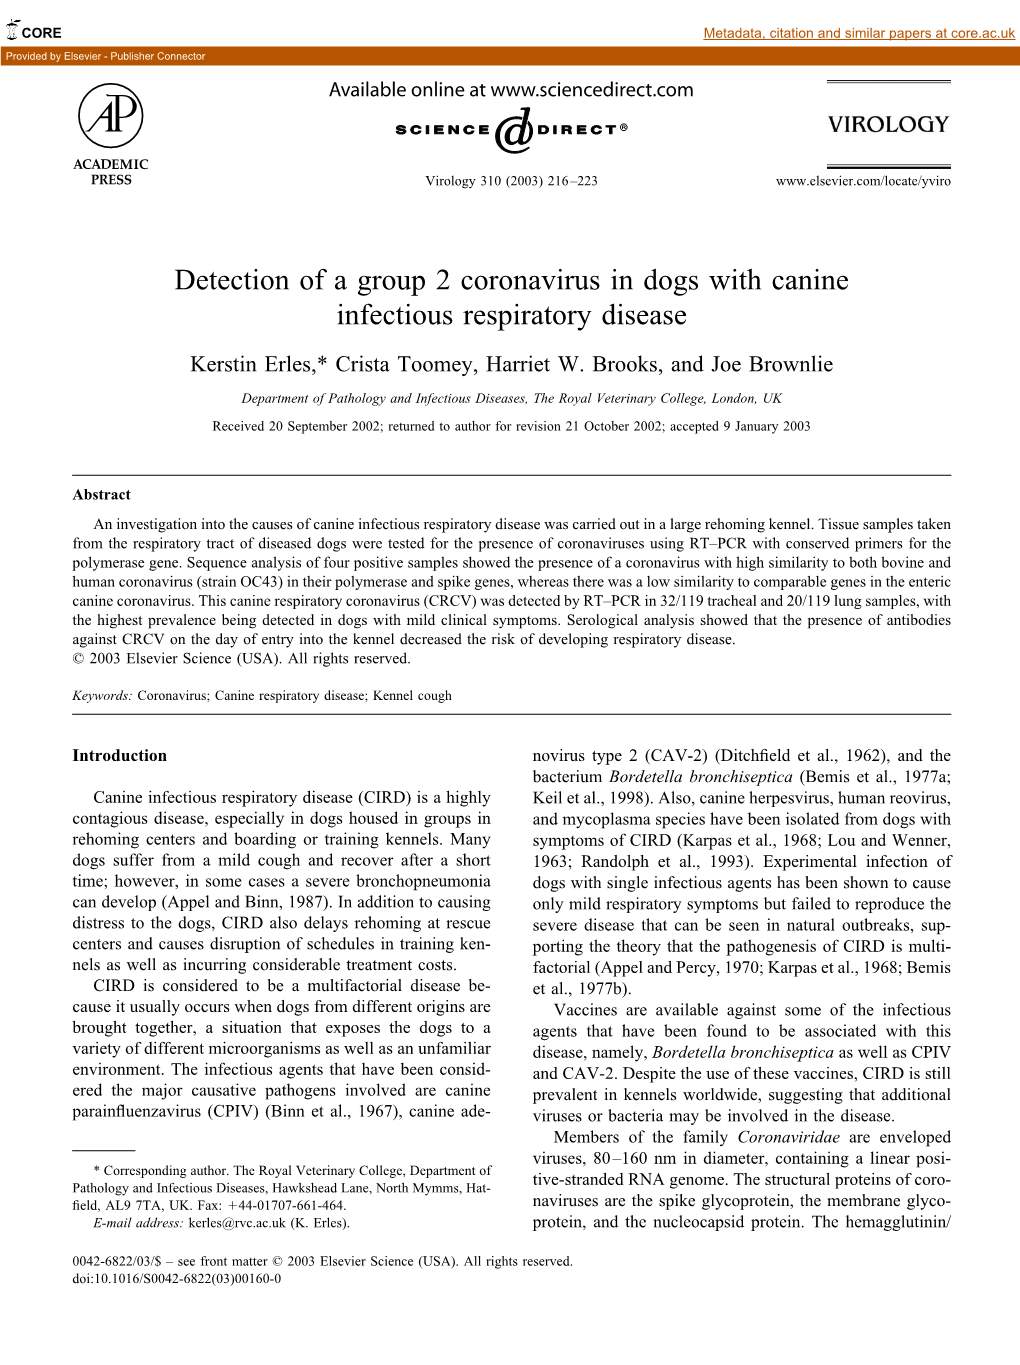 Detection of a Group 2 Coronavirus in Dogs with Canine Infectious Respiratory Disease